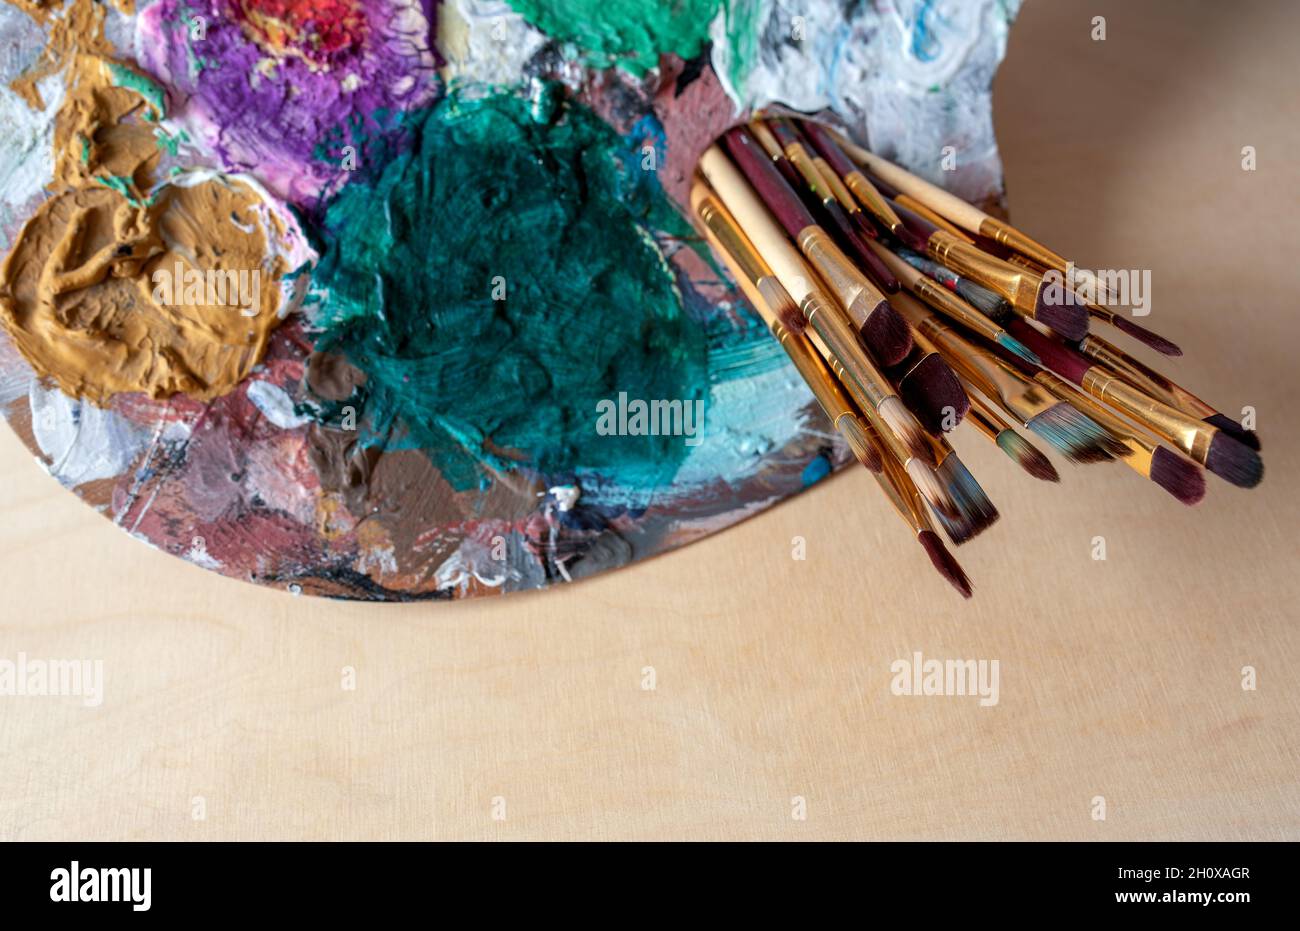 artist's palette with brushes over a wooden background Stock Photo